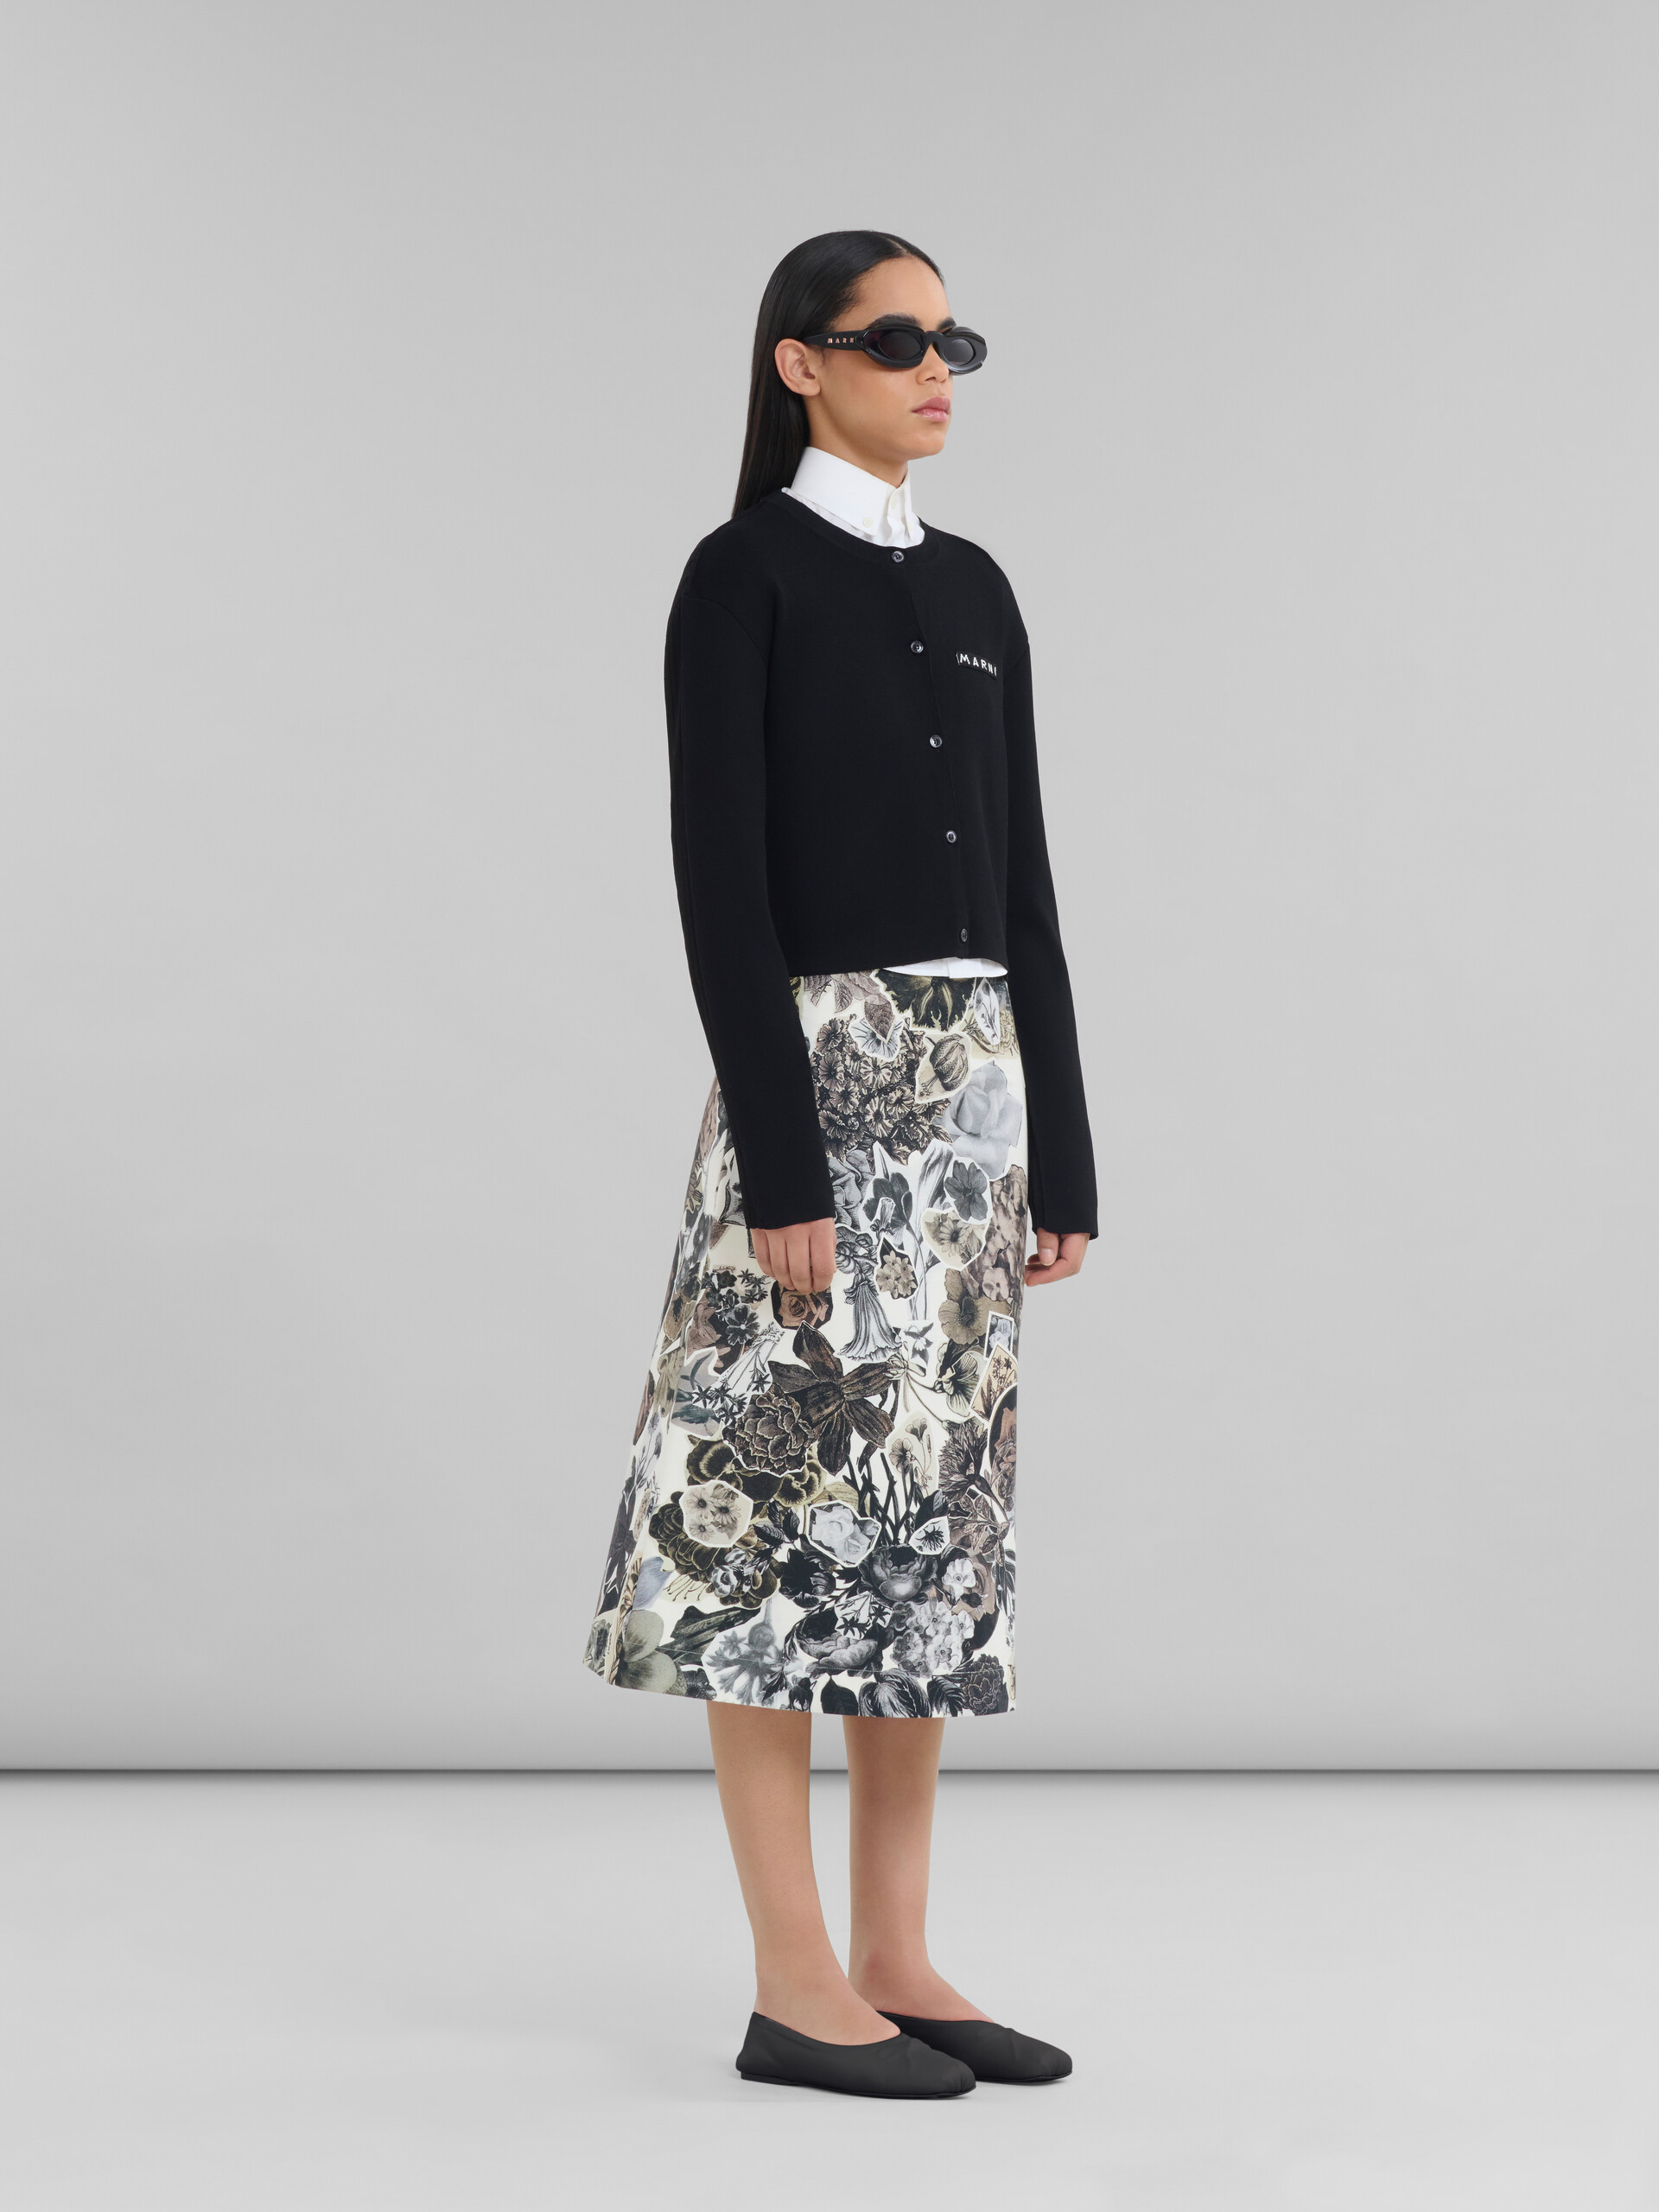 Black and white A-line skirt with Nocturnal print - Skirts - Image 5